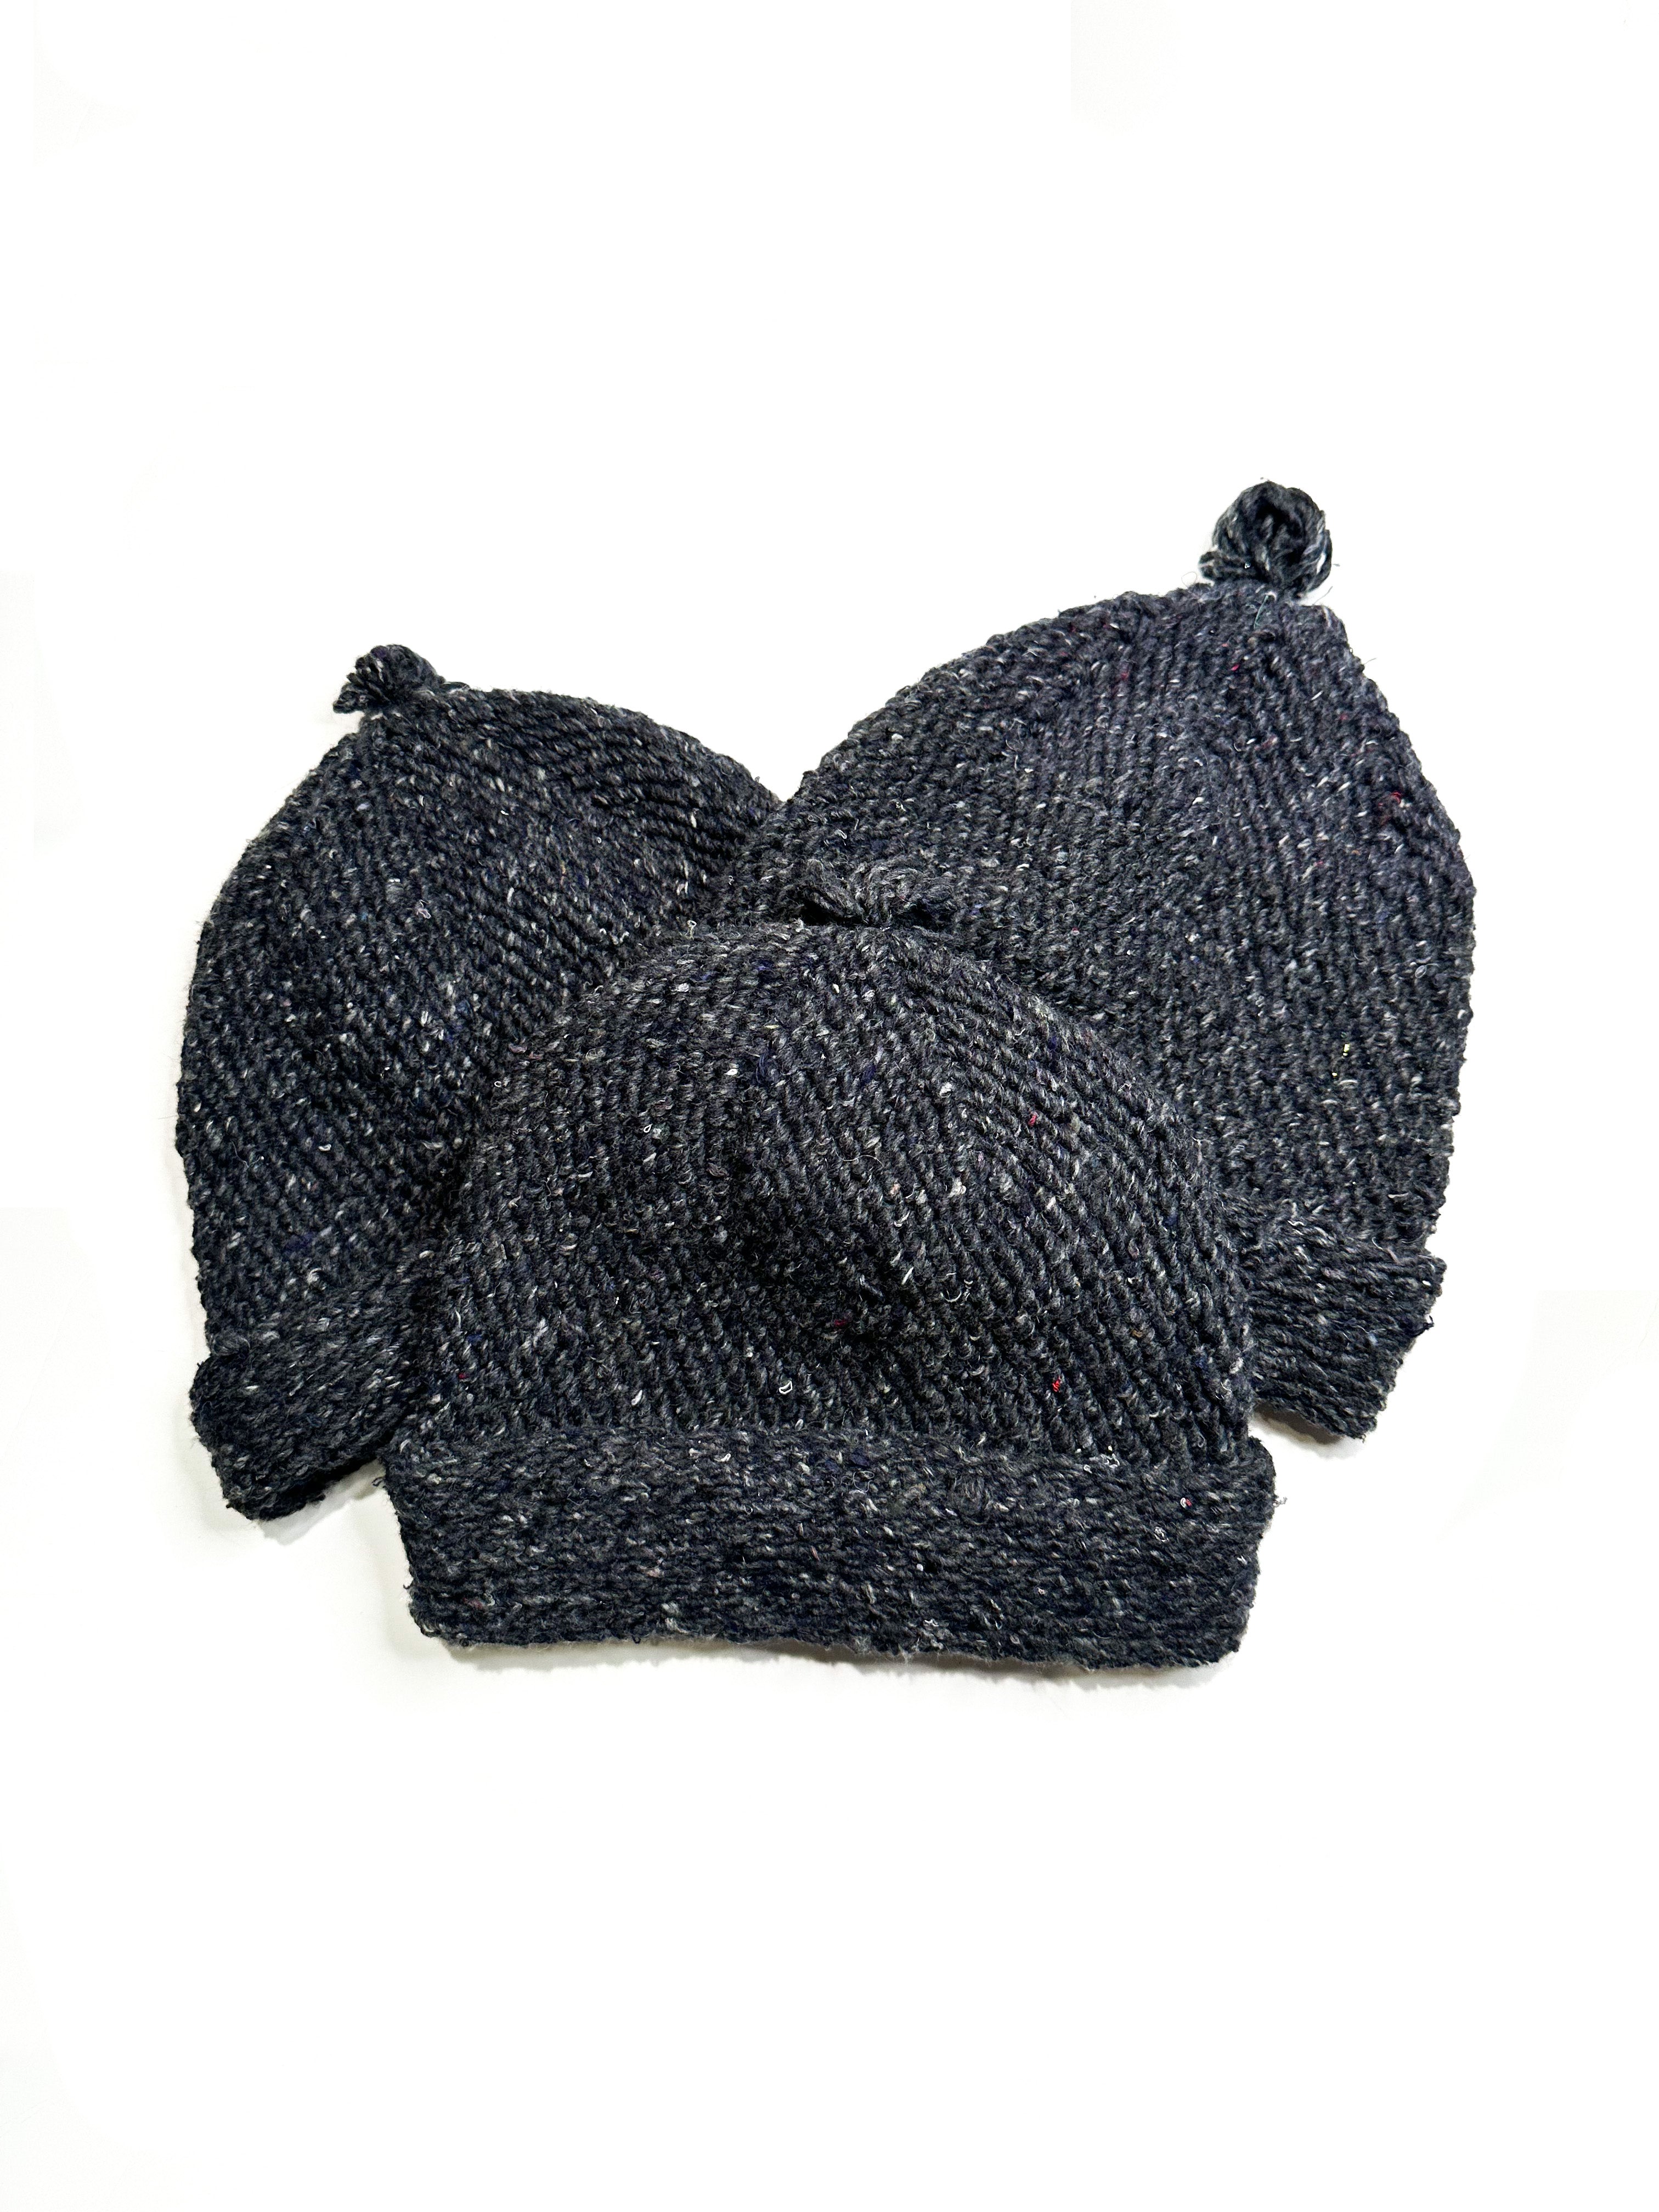 Wanderer Toque | Flecked Charcoal Wool